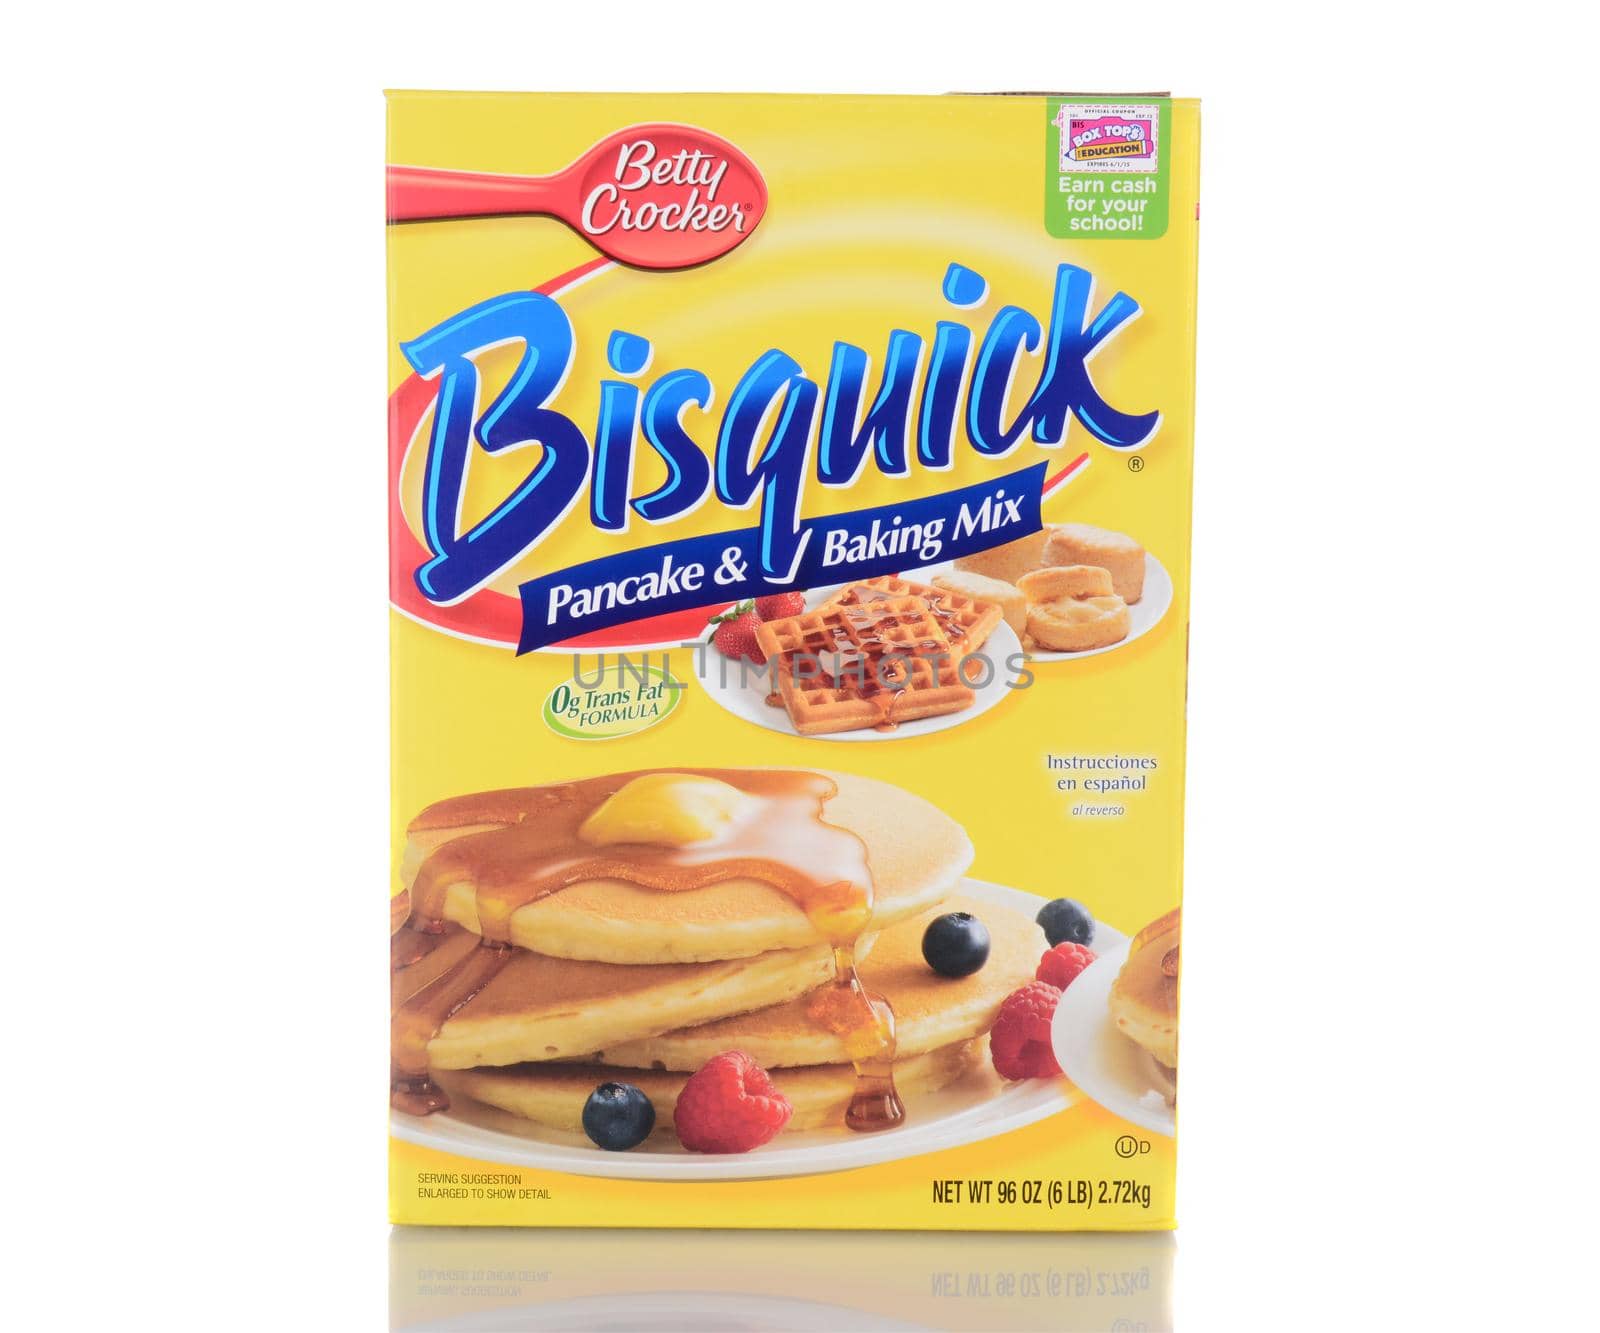 IRVINE, CA - January 05, 2014: Betty Crocker Bisquick. One 96 oz. box of Bisquick Pancake and Baking Mix. Betty Crocker is a brand name and trademark of General Mills.